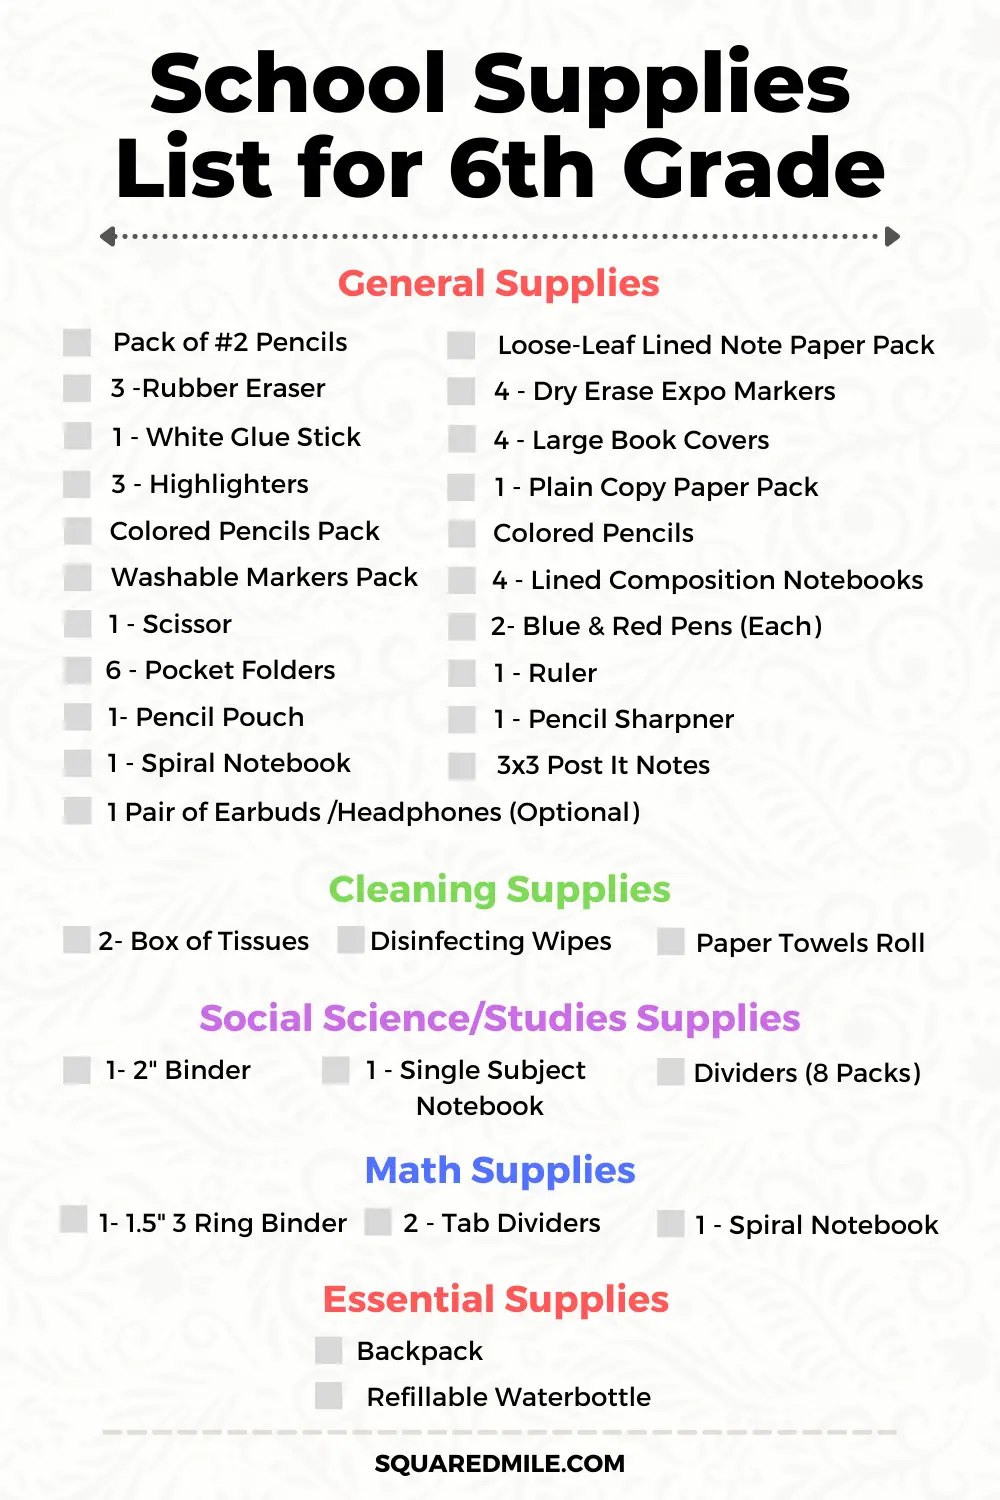 School Supplies List for 6th Grade 2021-2022 (Printables Included)